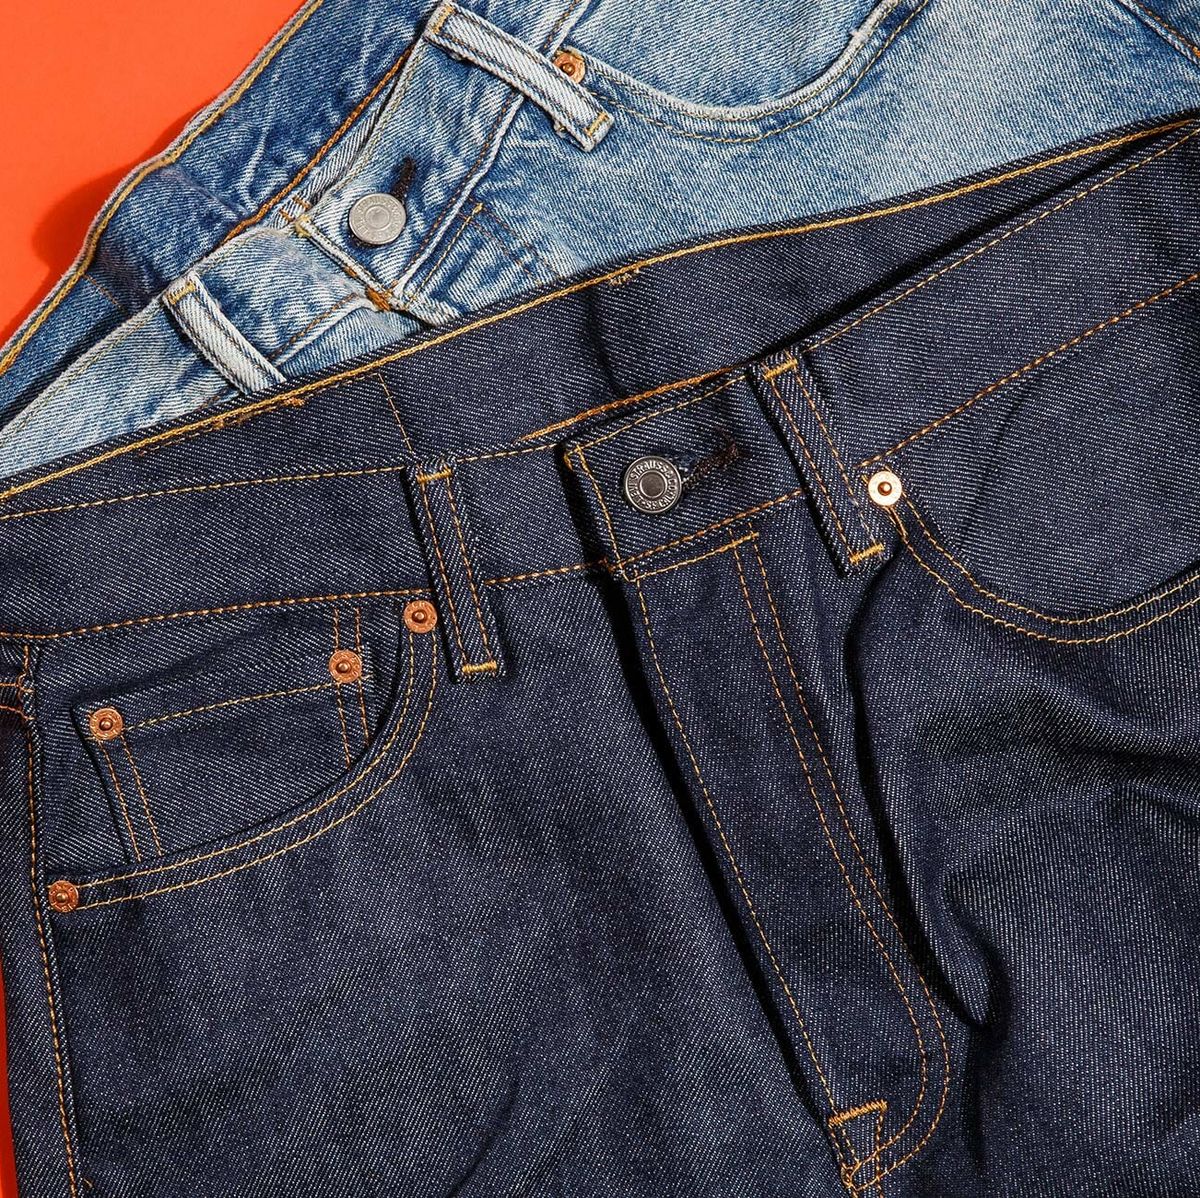 Levi's 501 the Affordable Classic Jeans Still